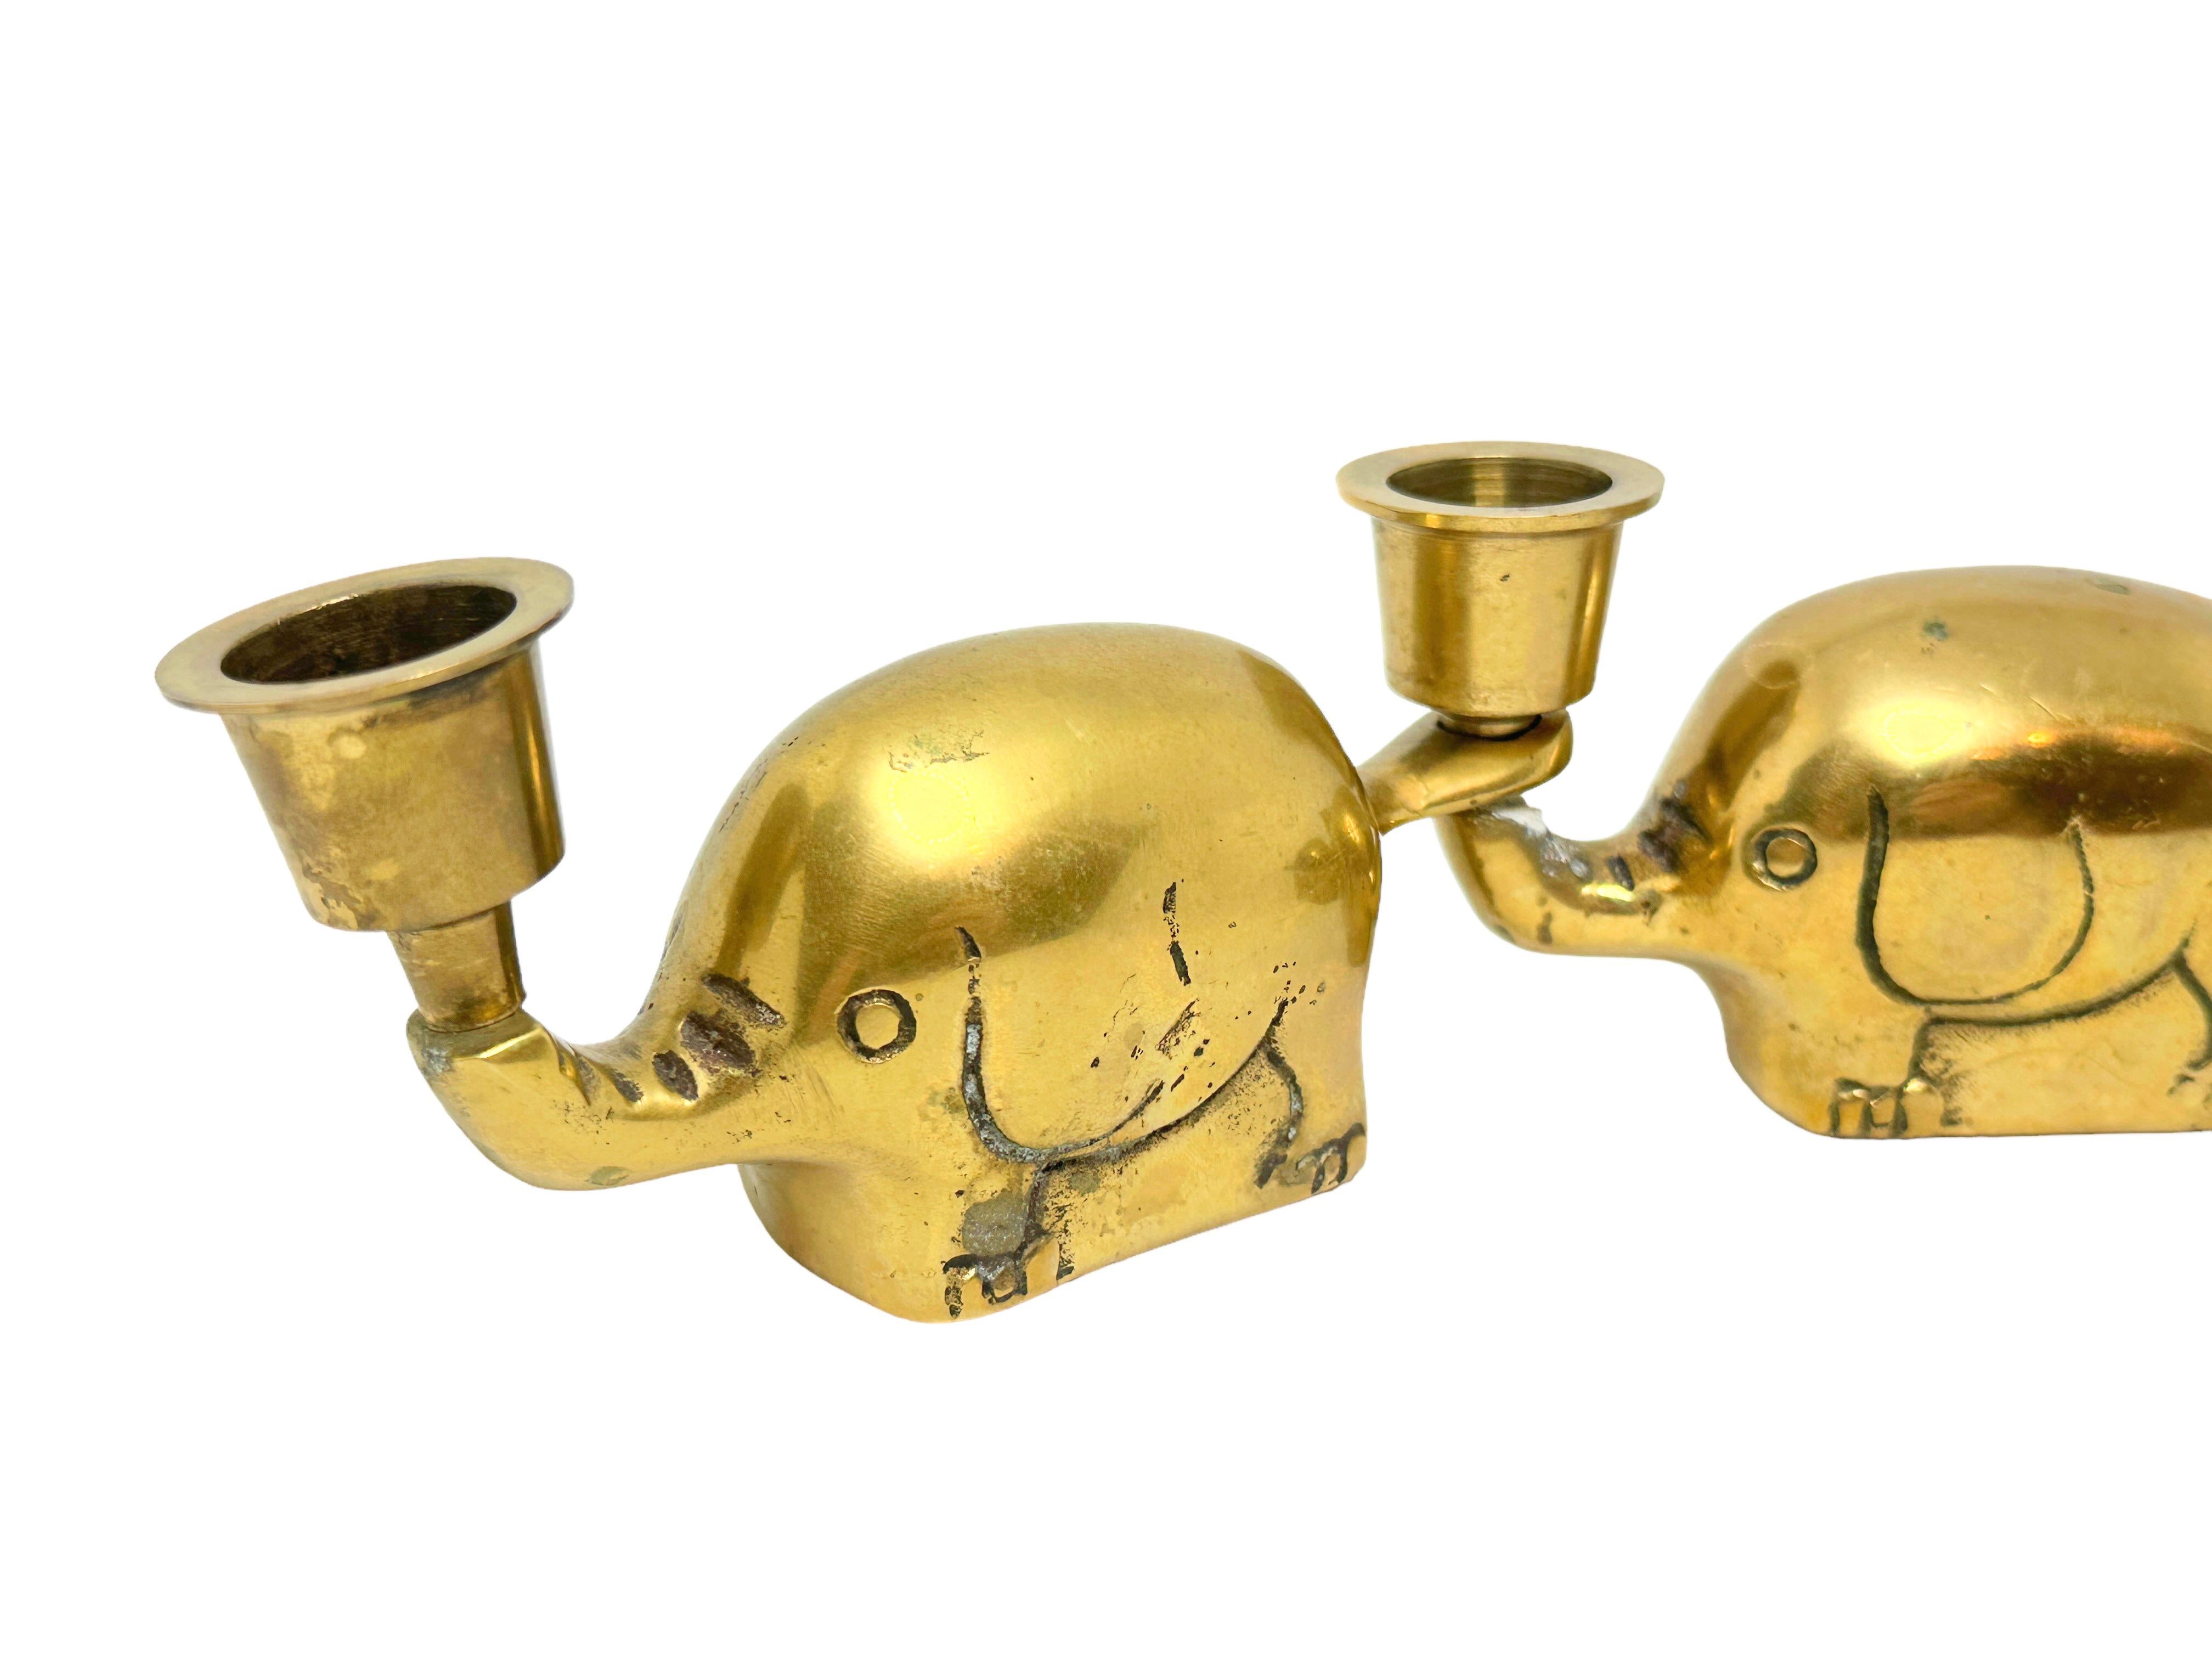 Very rare set of three Art Deco brass candlesticks elephant herd, Germany, 1940s. Can be used as single or in a chain. Each one is approximate 2 3/8